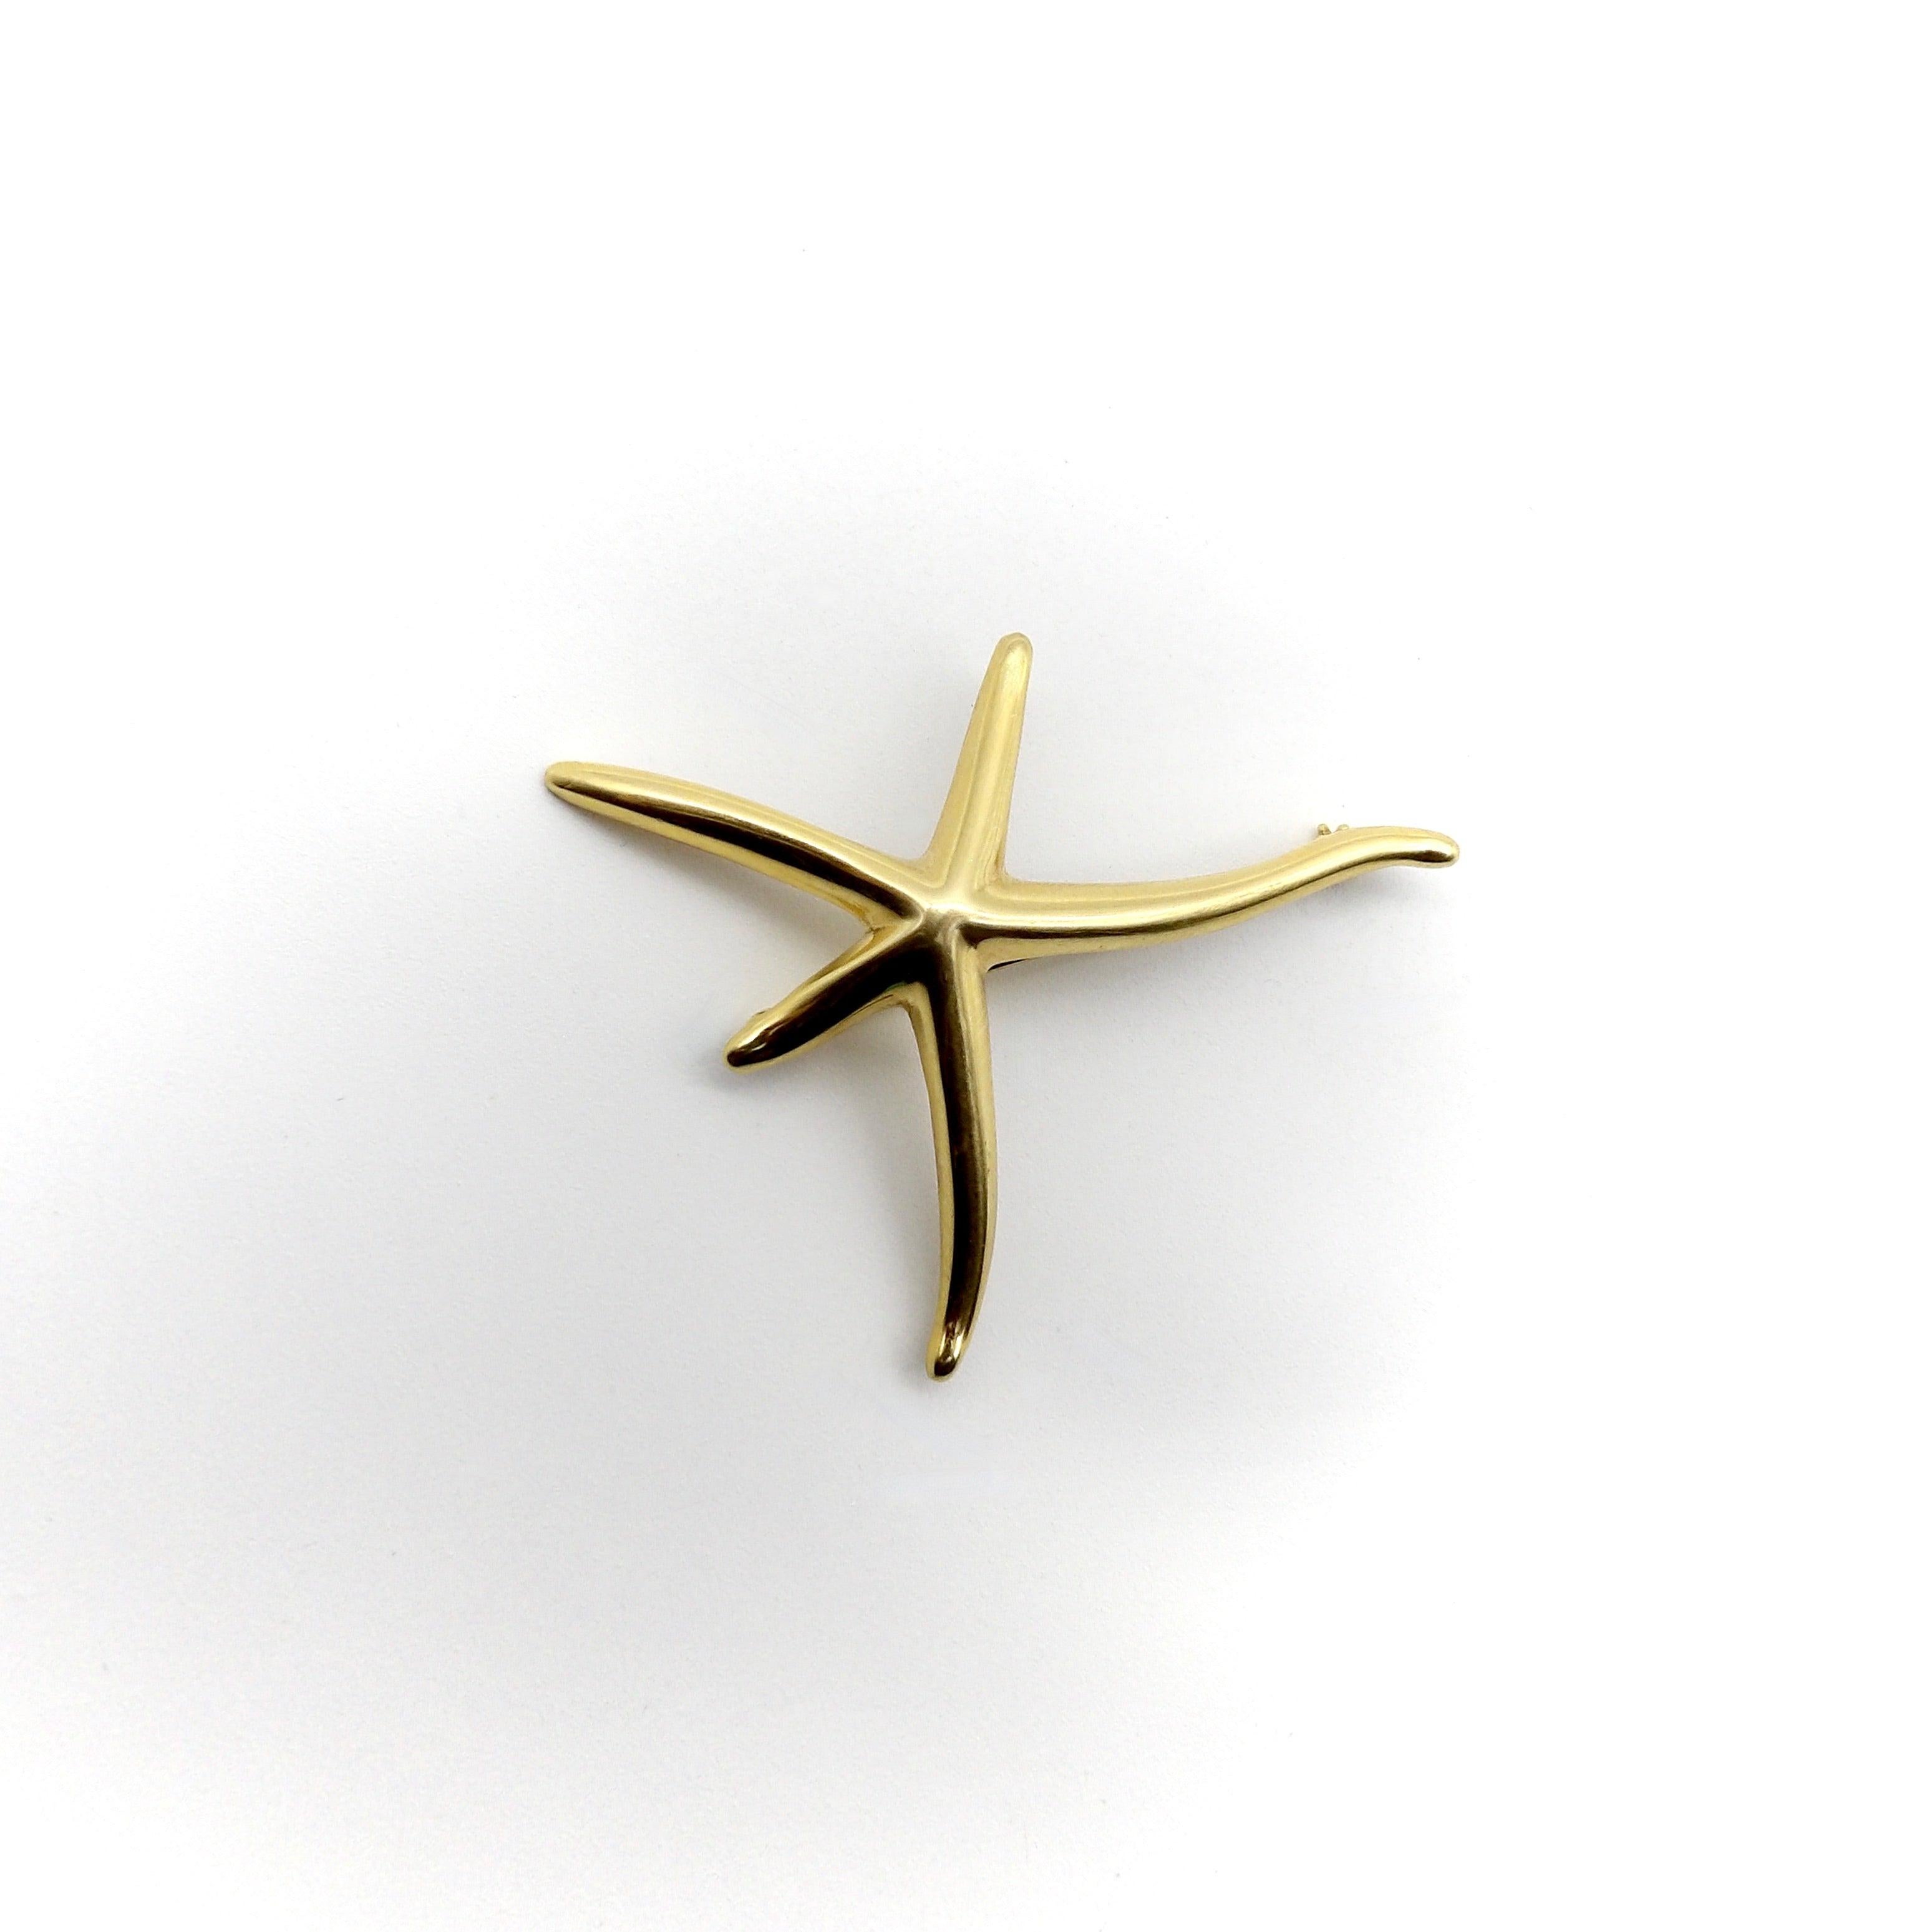 This lyrical starfish brooch exemplifies the playful and organic qualities of an Elsa Peretti design. Circa 1990, this is an earlier version of Elsa’s infamous starfish jewelry for Tiffany & Co. The legs of the starfish outstretch at different